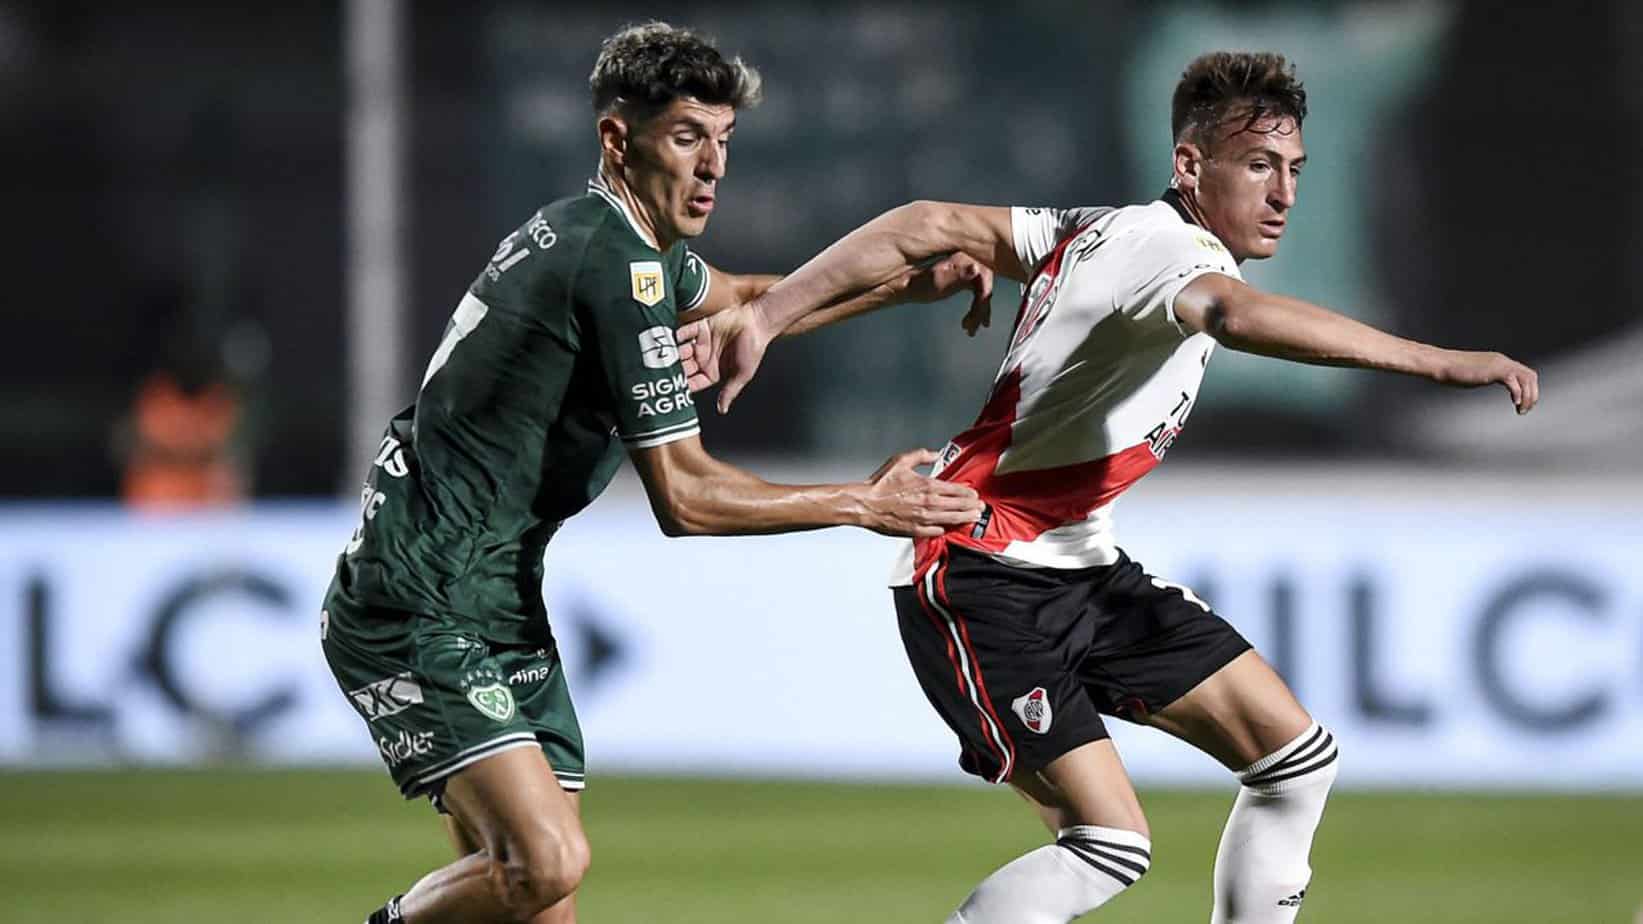 River Plate vs. Sarmiento – Betting Odds and Free Pick